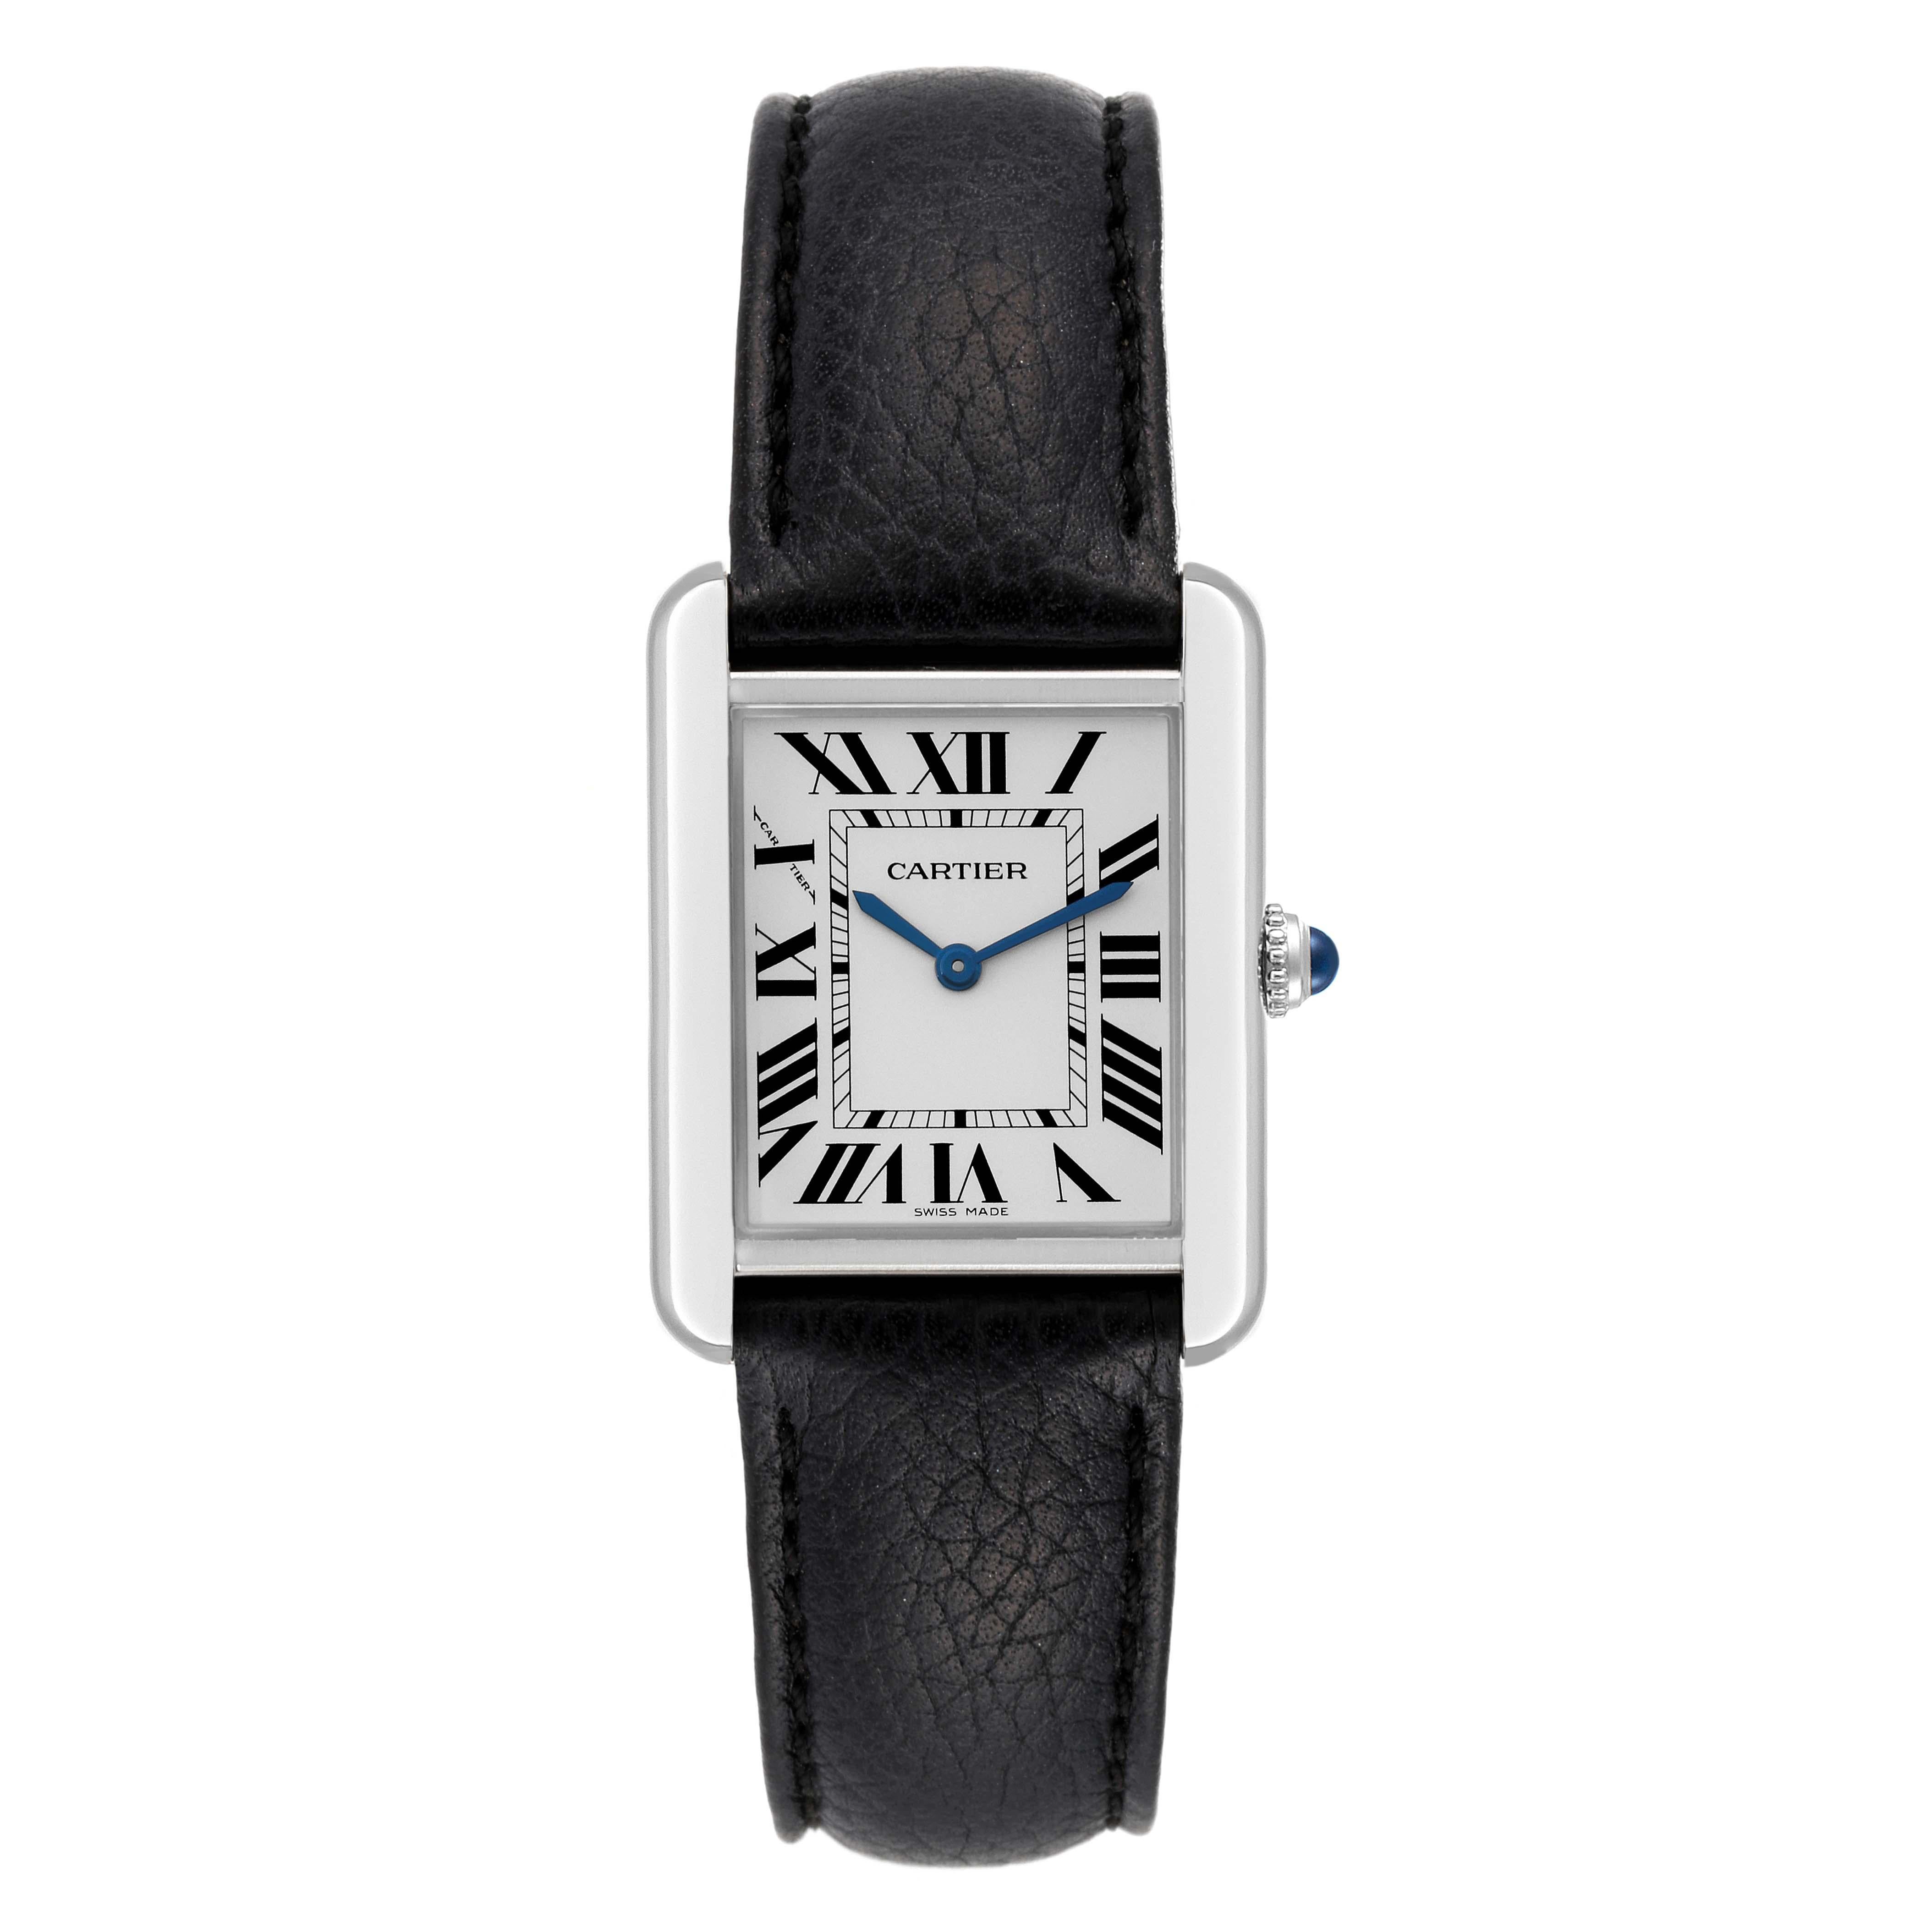 Cartier Tank Solo Steel Black Strap Quartz Ladies Watch W1018255. Quartz movement. Stainless steel case 30.0 x 23.0 mm. Circular grained crown set with the blue spinel cabochon. . Scratch resistant sapphire crystal. Silver opaline dial. Painted